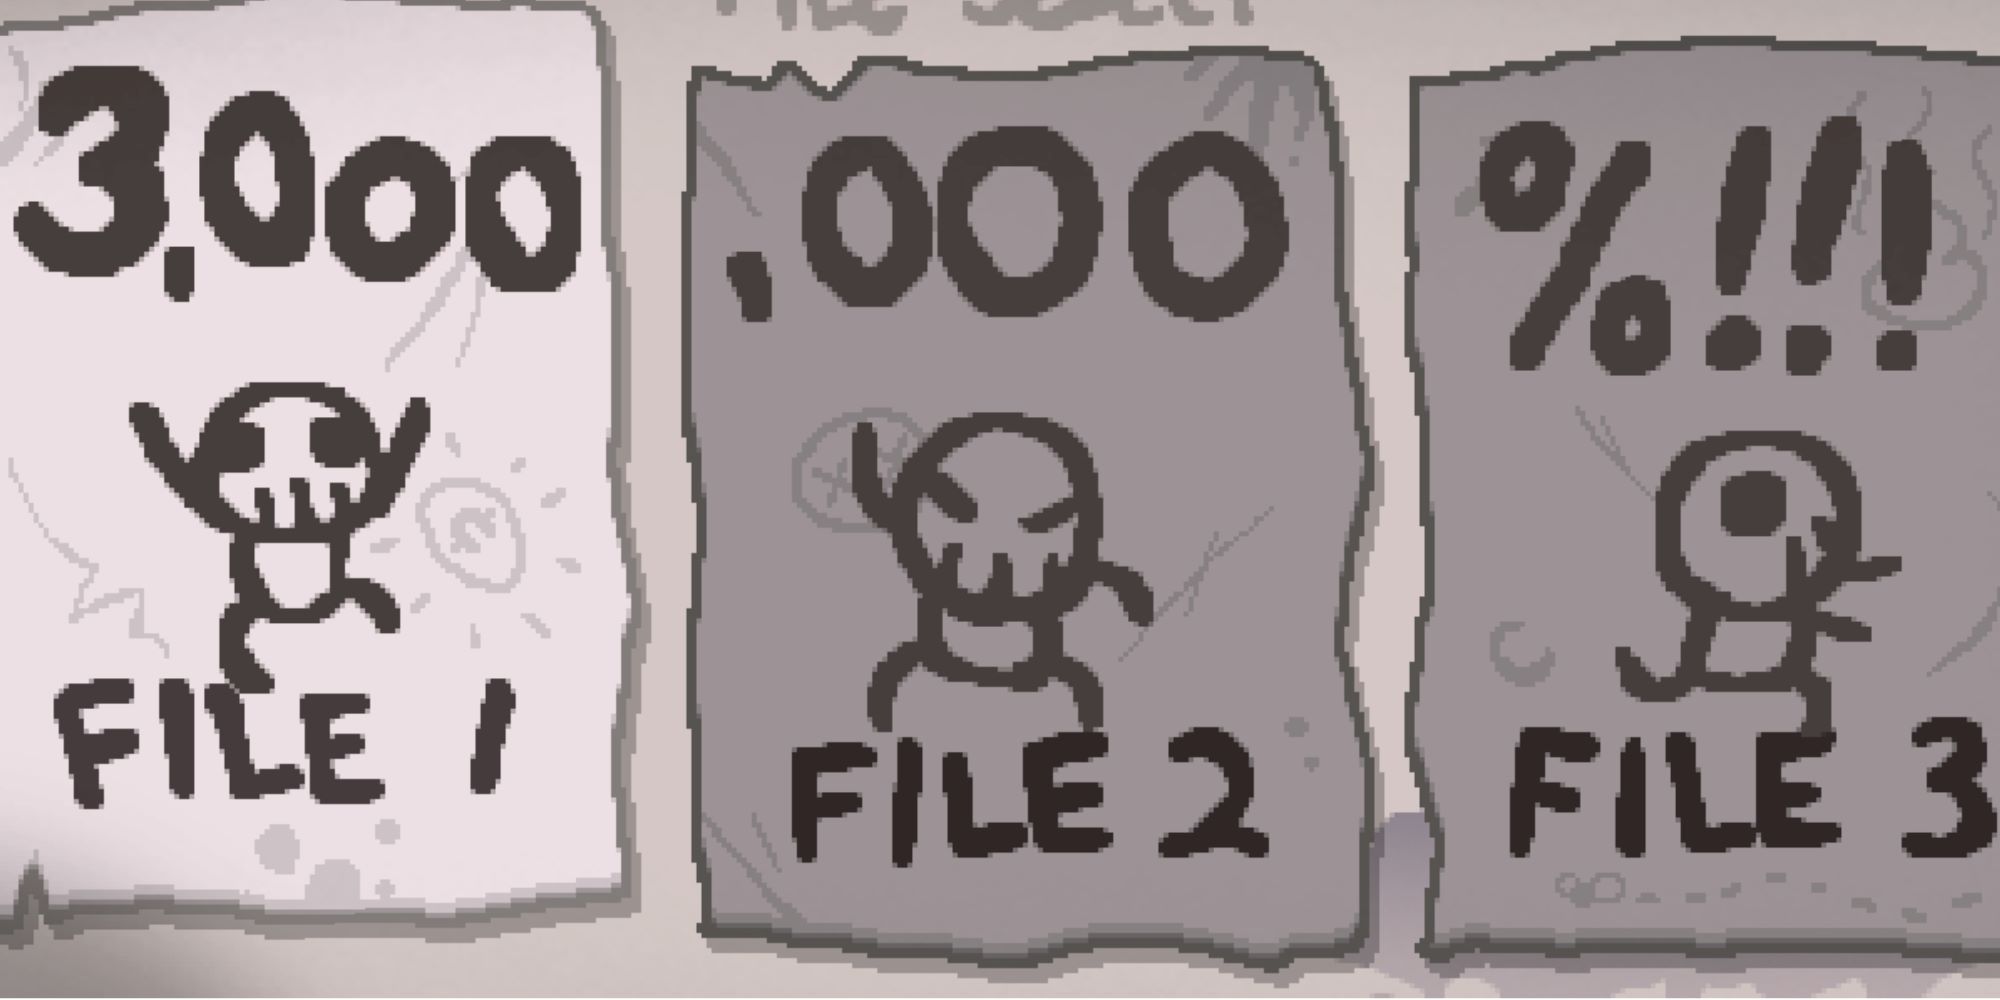 Binding of Isaac complete file